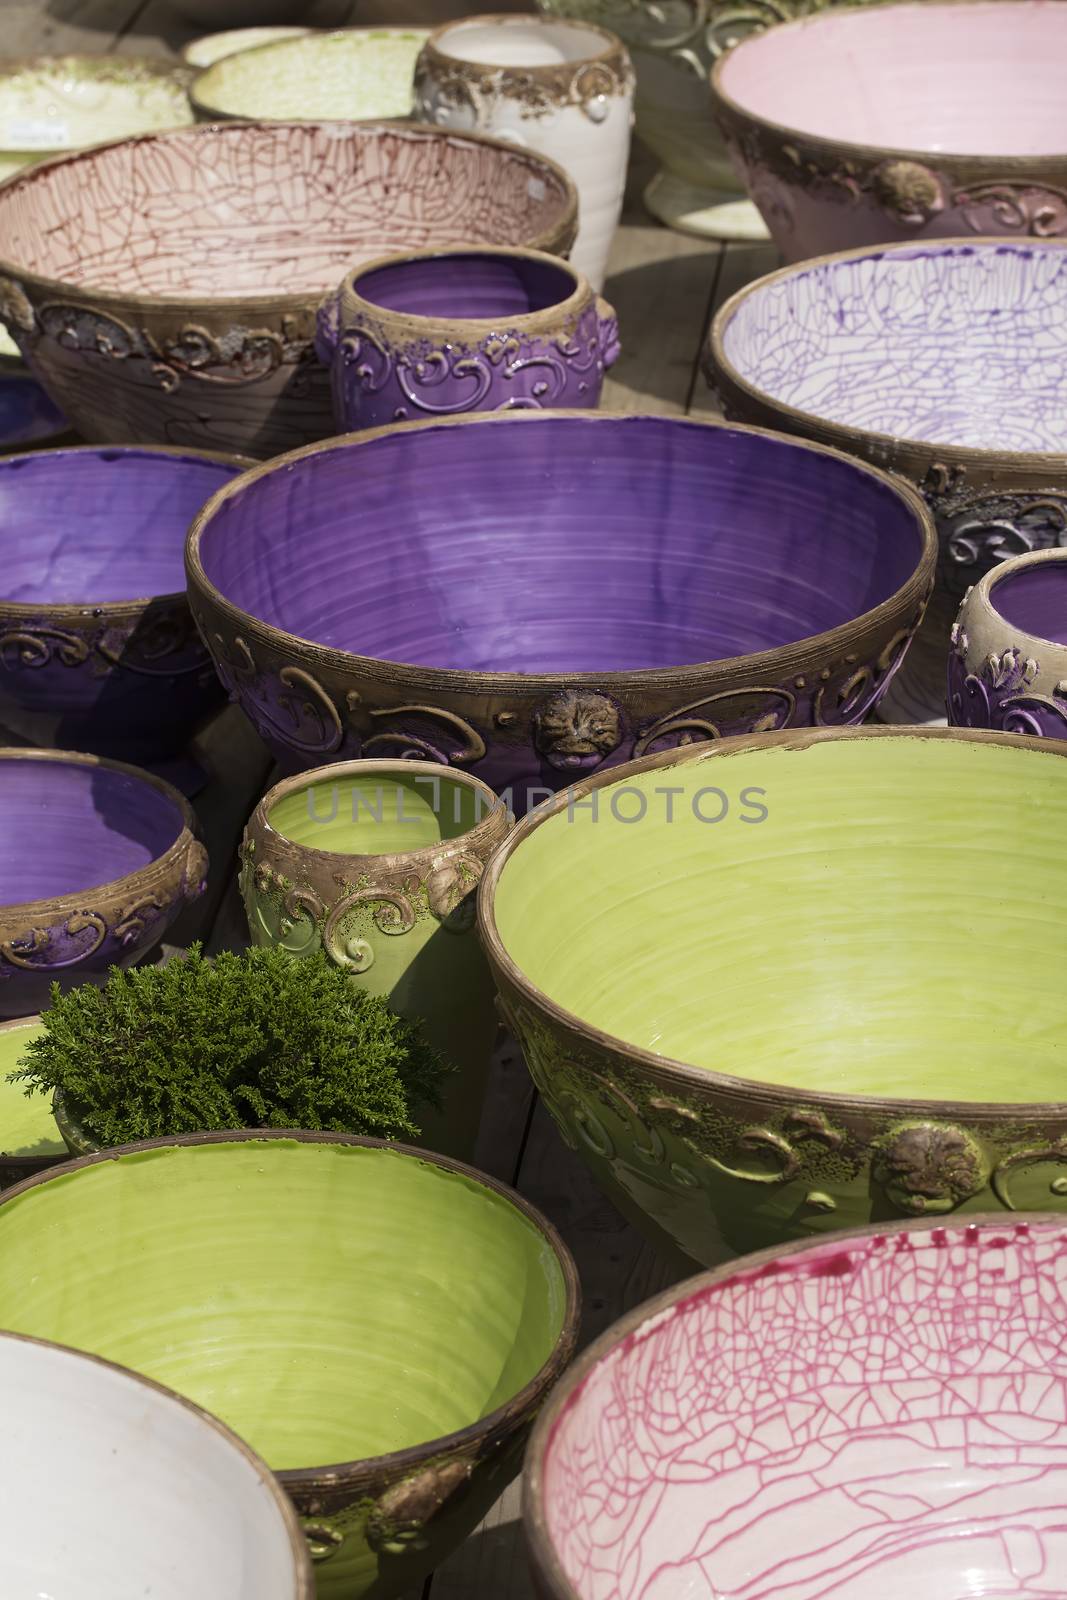 Rustic ceramic bowls in vibrant colors for sale